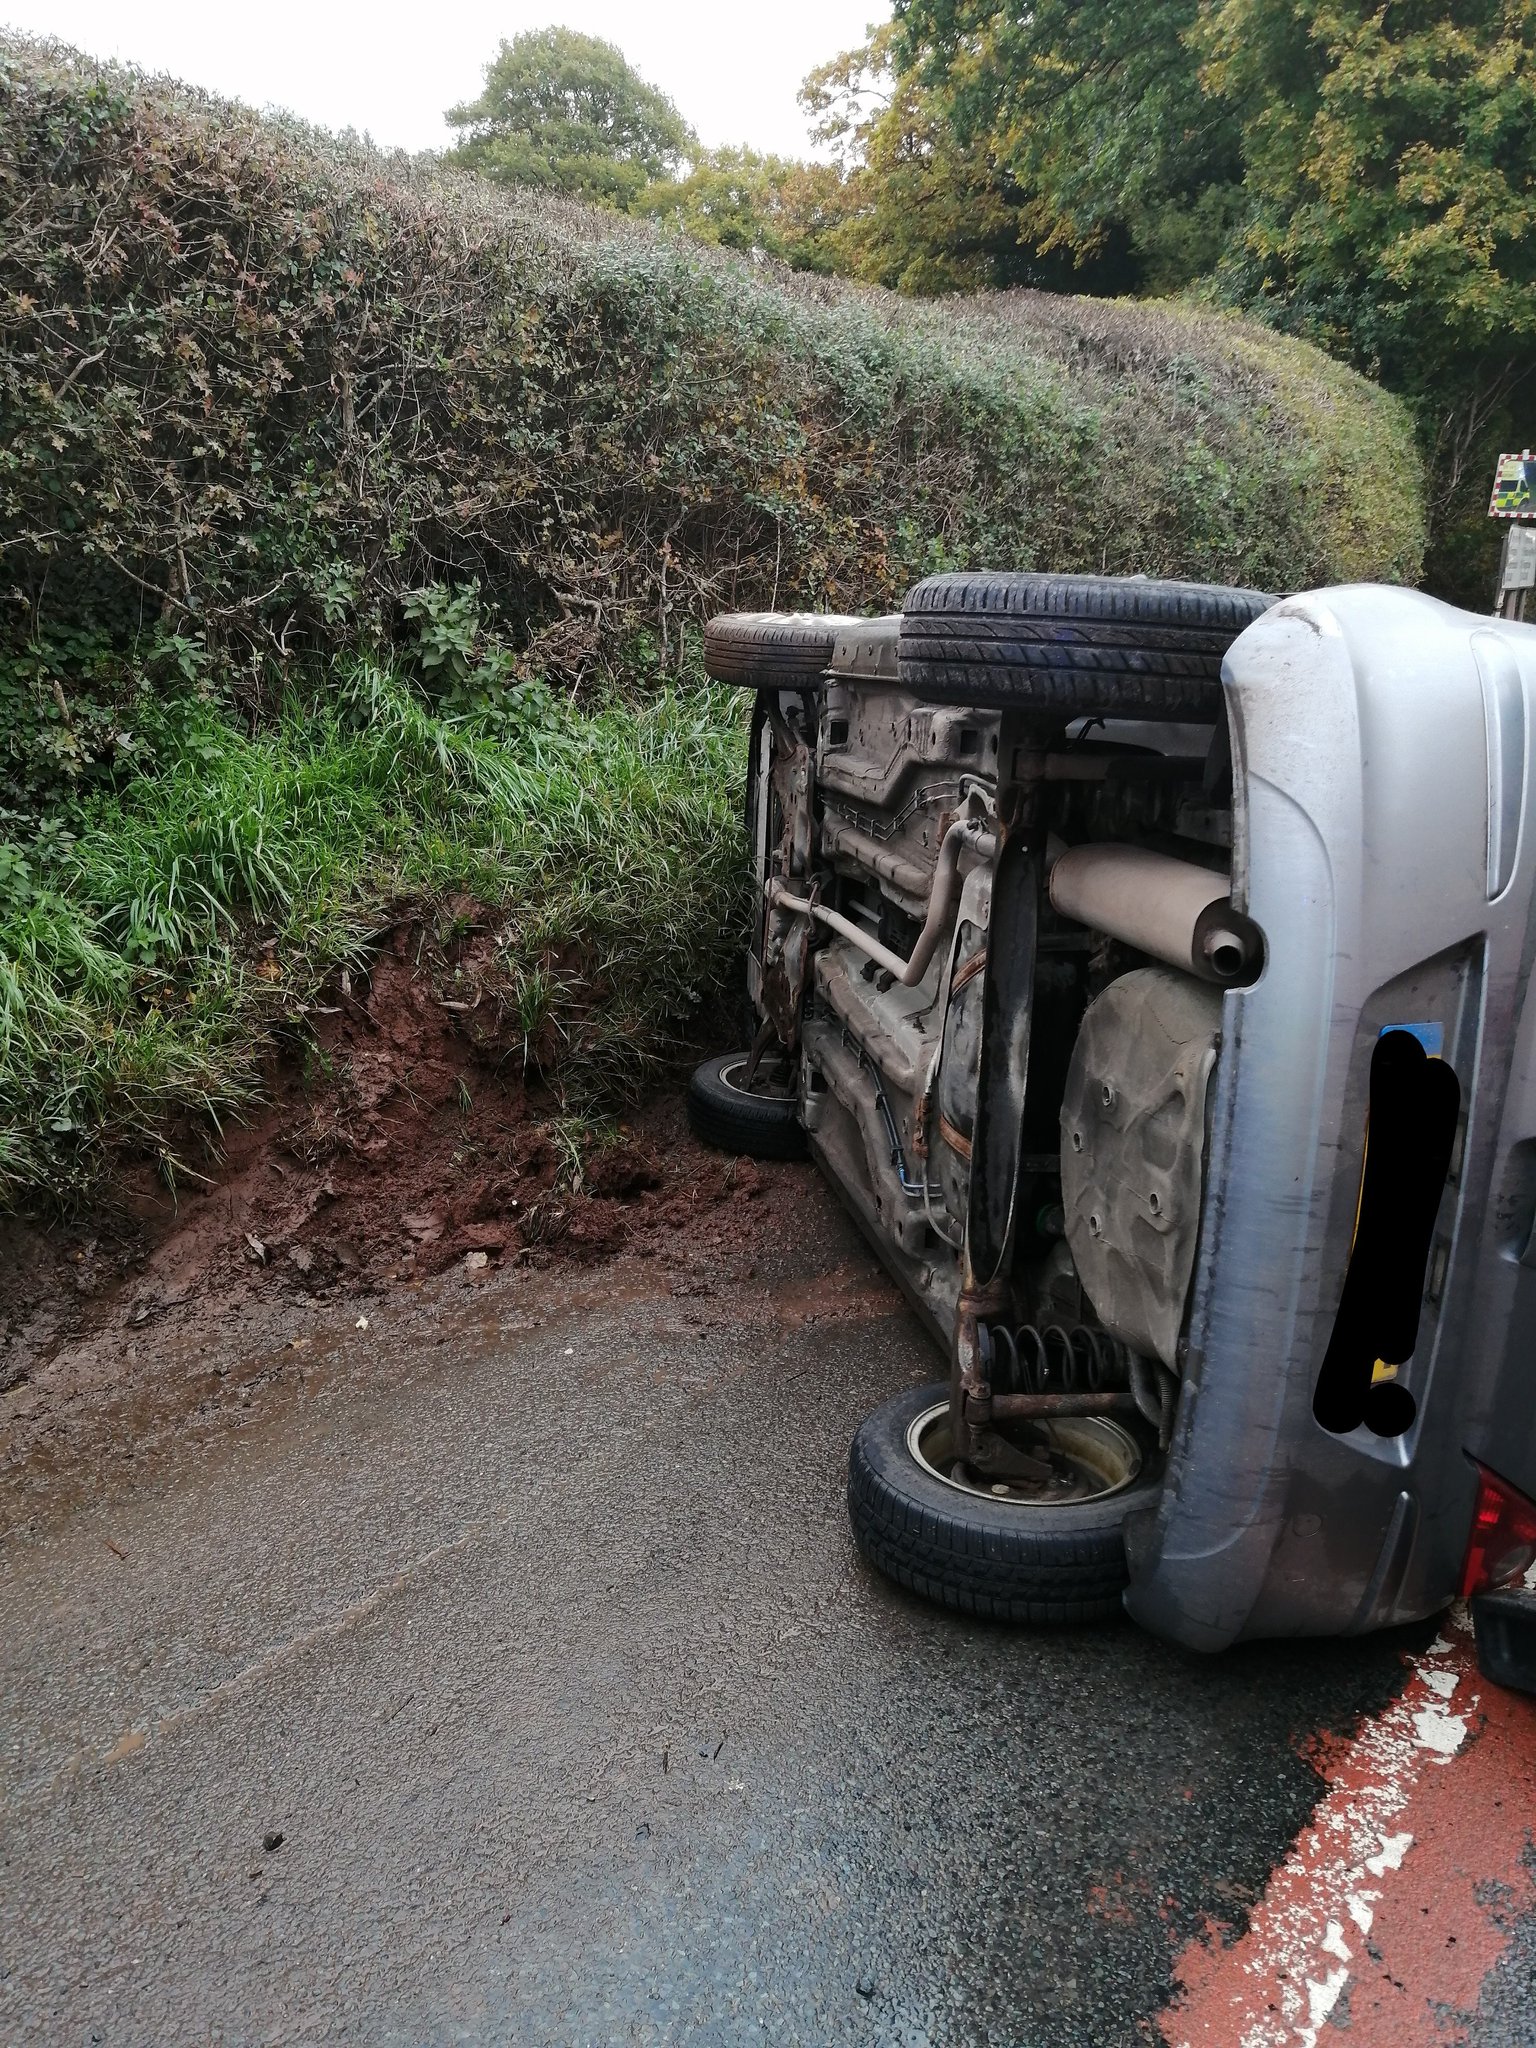 NEWS | Emergency services deal with crash in Vowchurch